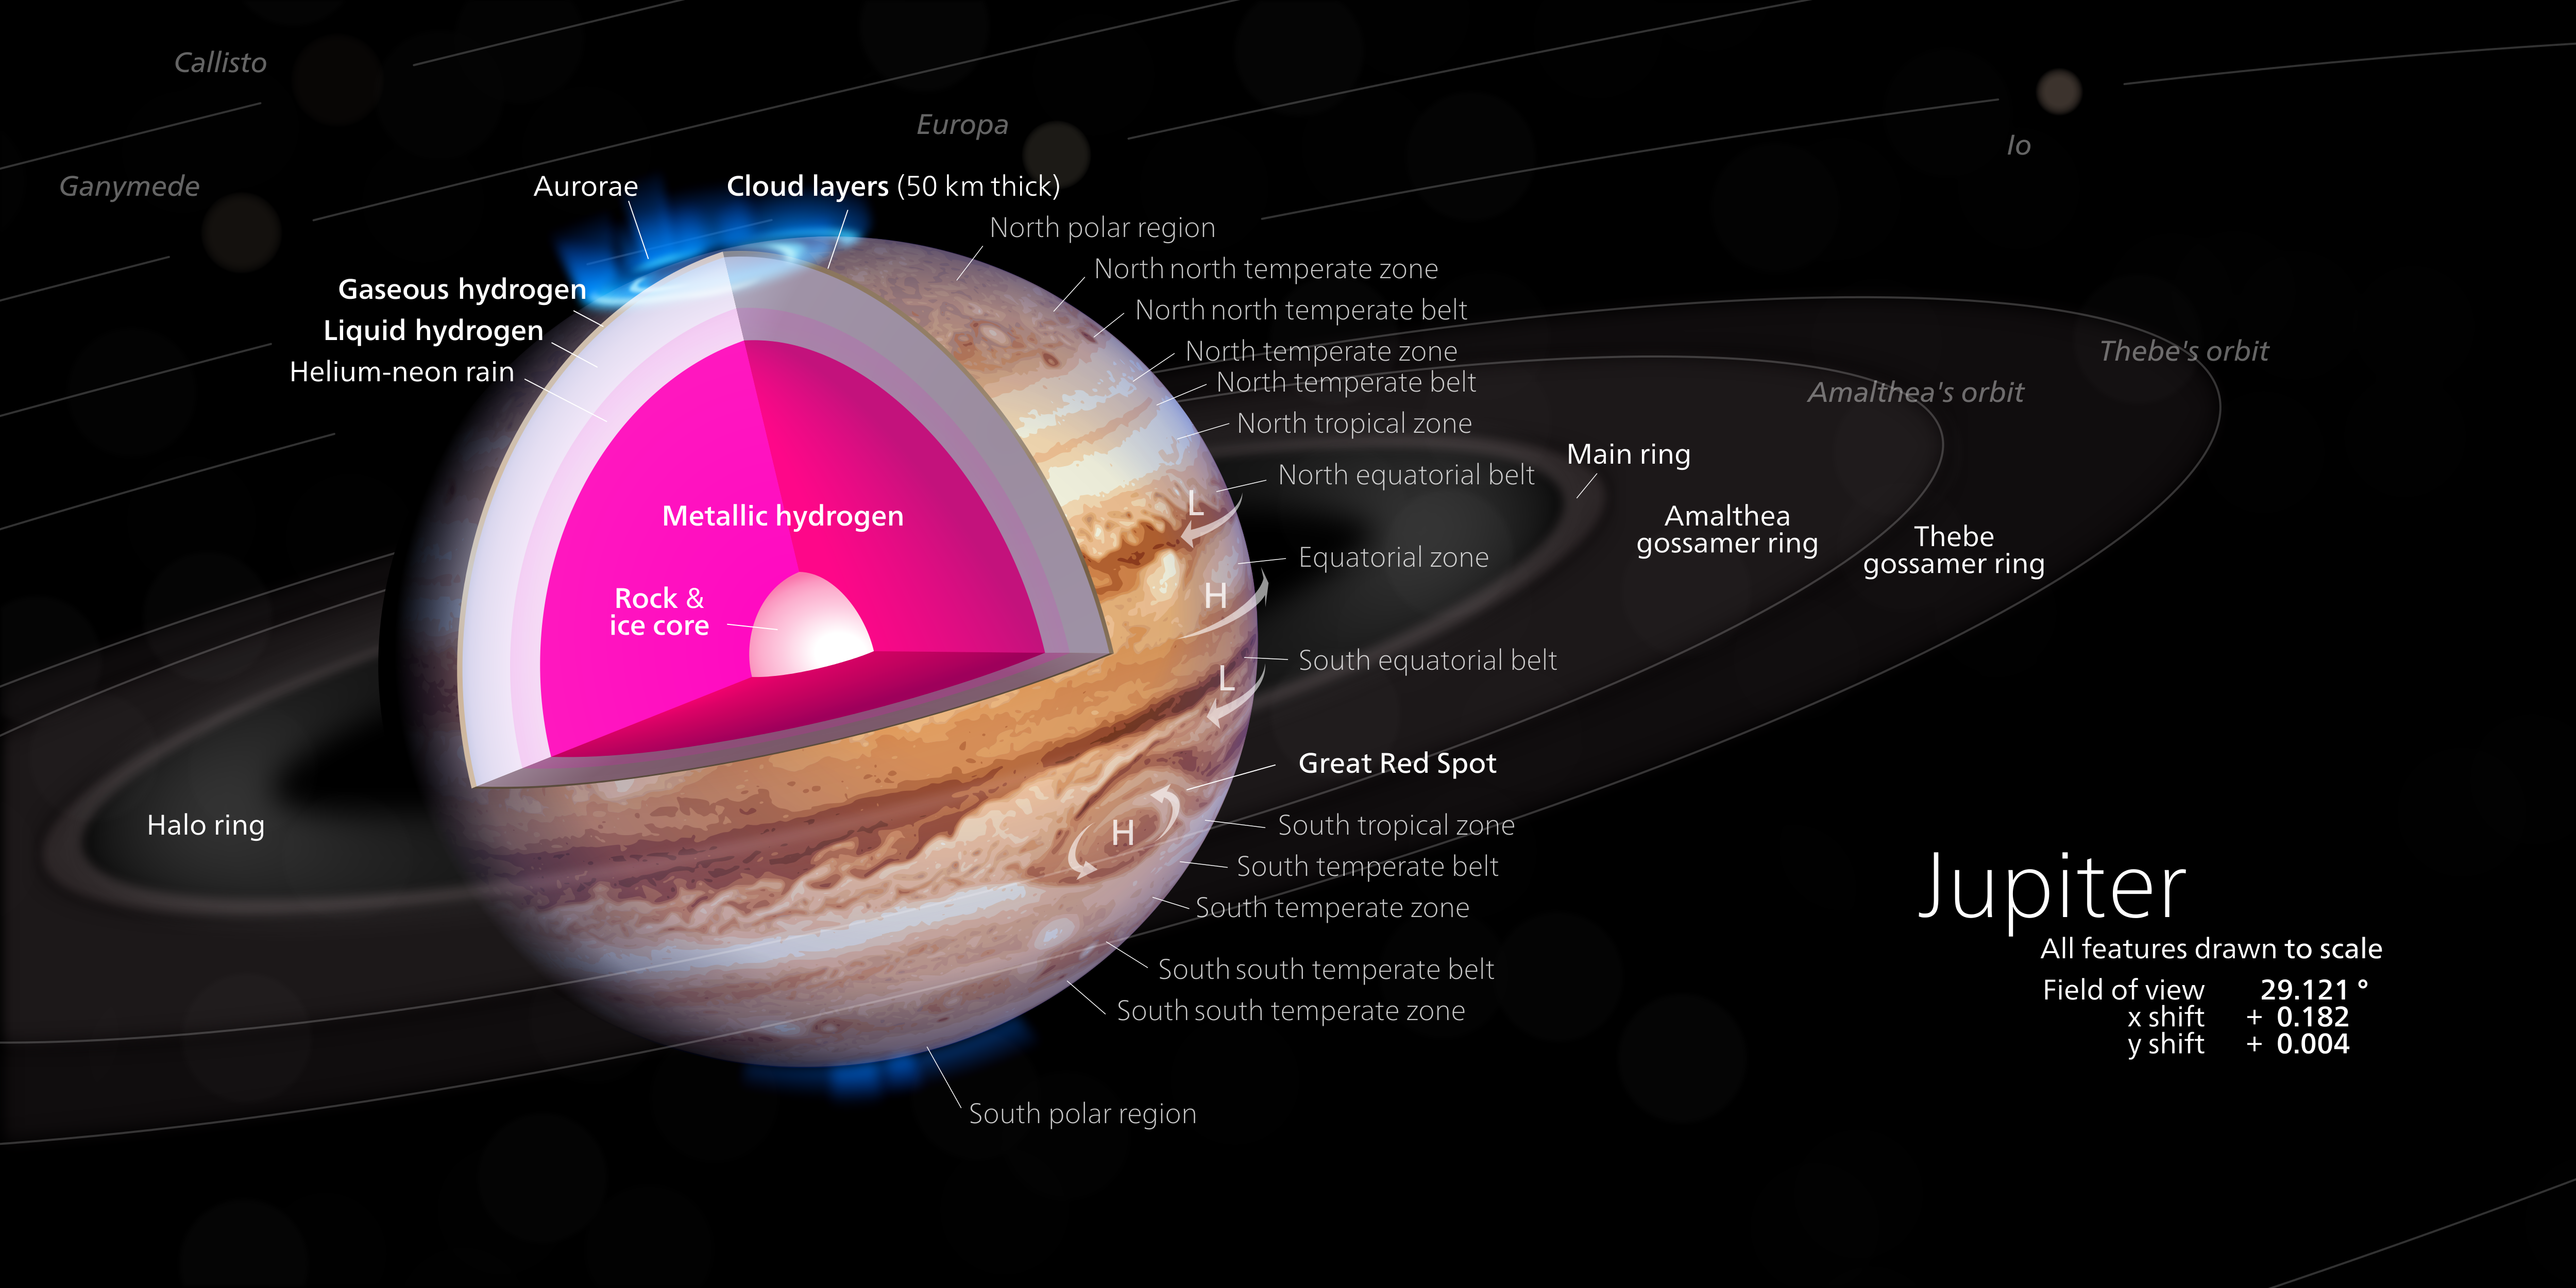 This cut-away illustrates a model of the interior of Jupiter, with a rocky core overlaid by a deep layer of liquid metallic hydrogen. Diagram from 2014 of Jupiter, its interior, surface features, rings, and inner moons. A 3D renderer was used to make the skeleton for this picture so everything is drawn to scale (except the aurorae). This diagram was drawn precisely to the specifications in the sources used, however scientists weren’t certain if Jupiter had a solid core or if there’s actually such a thing as metallic hydrogen, which remains theoretical to this date. Infographic created by Kelvinsong (CC BY-SA 3.0) https://en.wikipedia.org/wiki/Jupiter#/media/File:Jupiter_diagram.svg